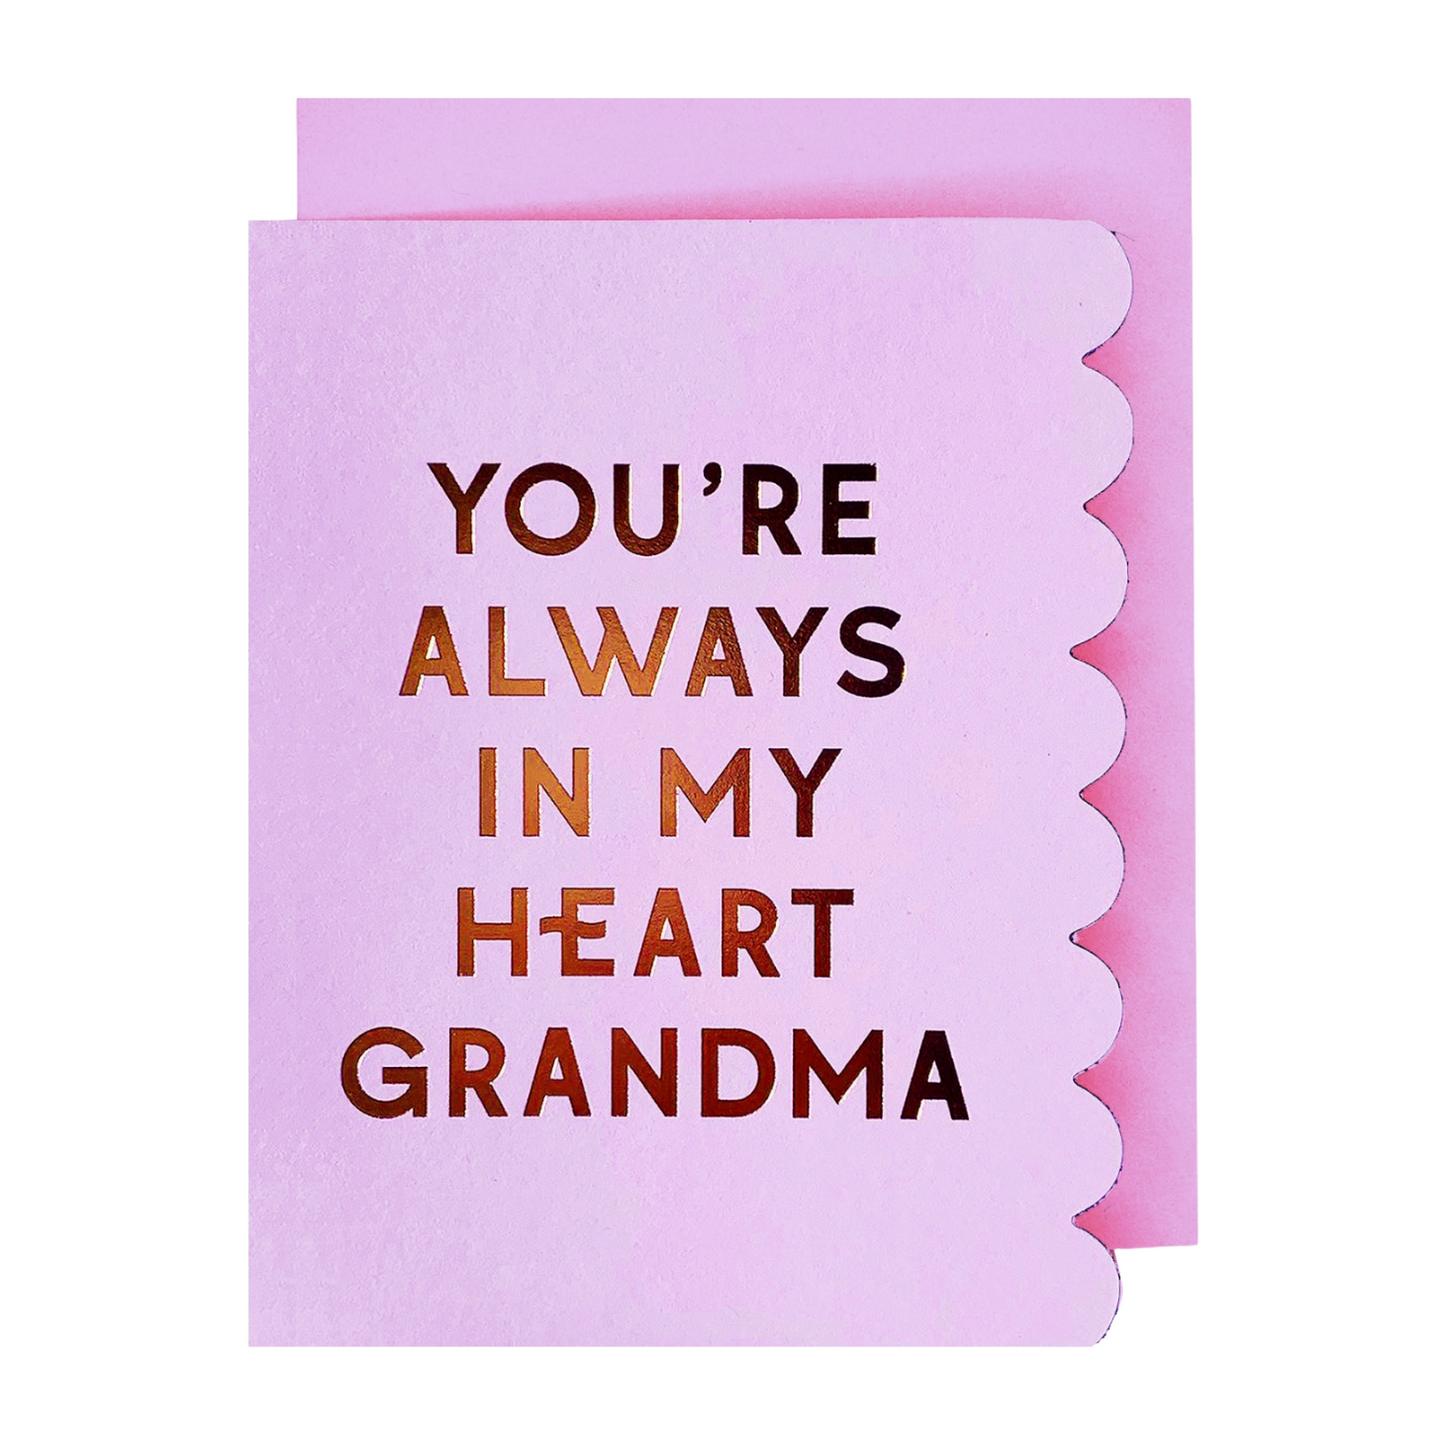 In My Heart Grandma Card by The Social Type 